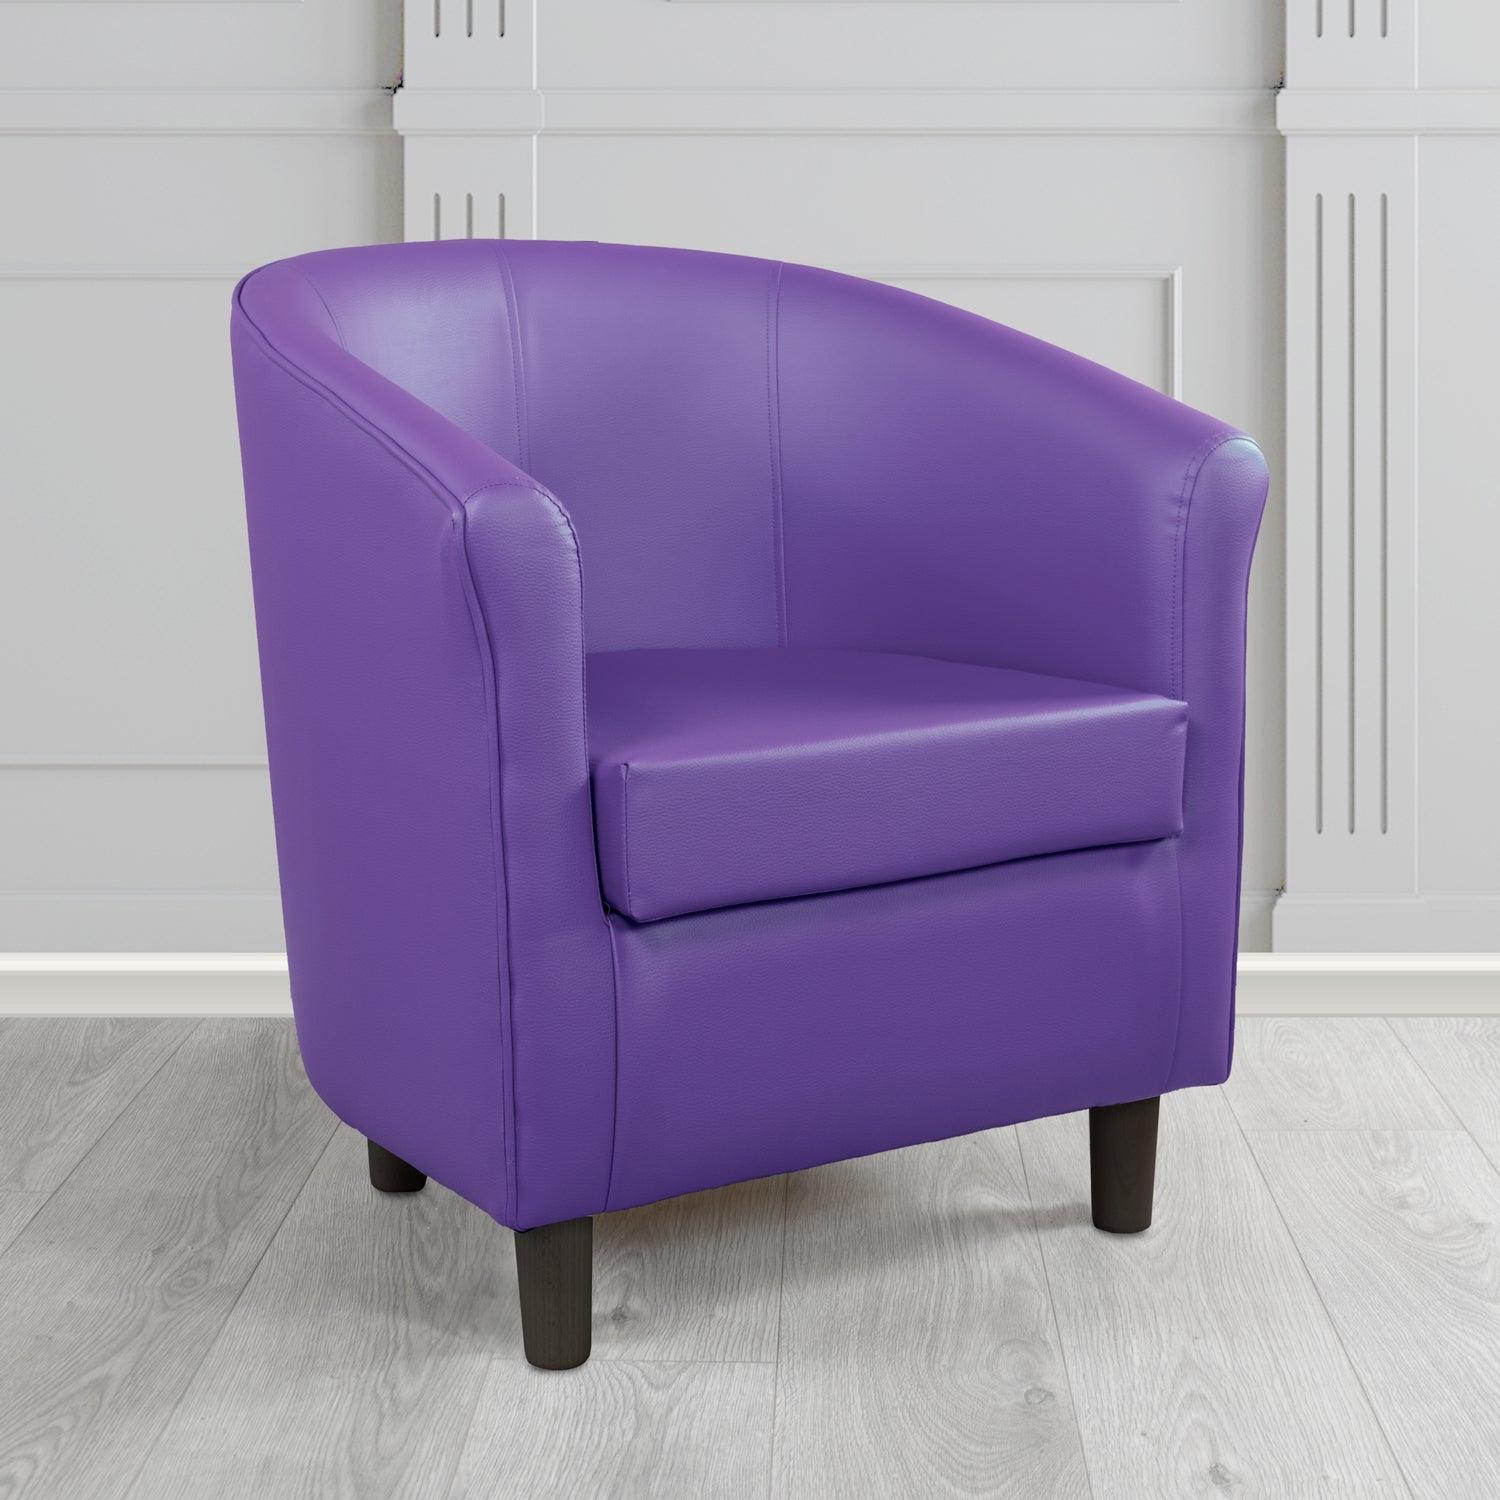 Tuscany Just Colour Ultraviolet Antimicrobial Crib 5 Contract Faux Leather Tub Chair